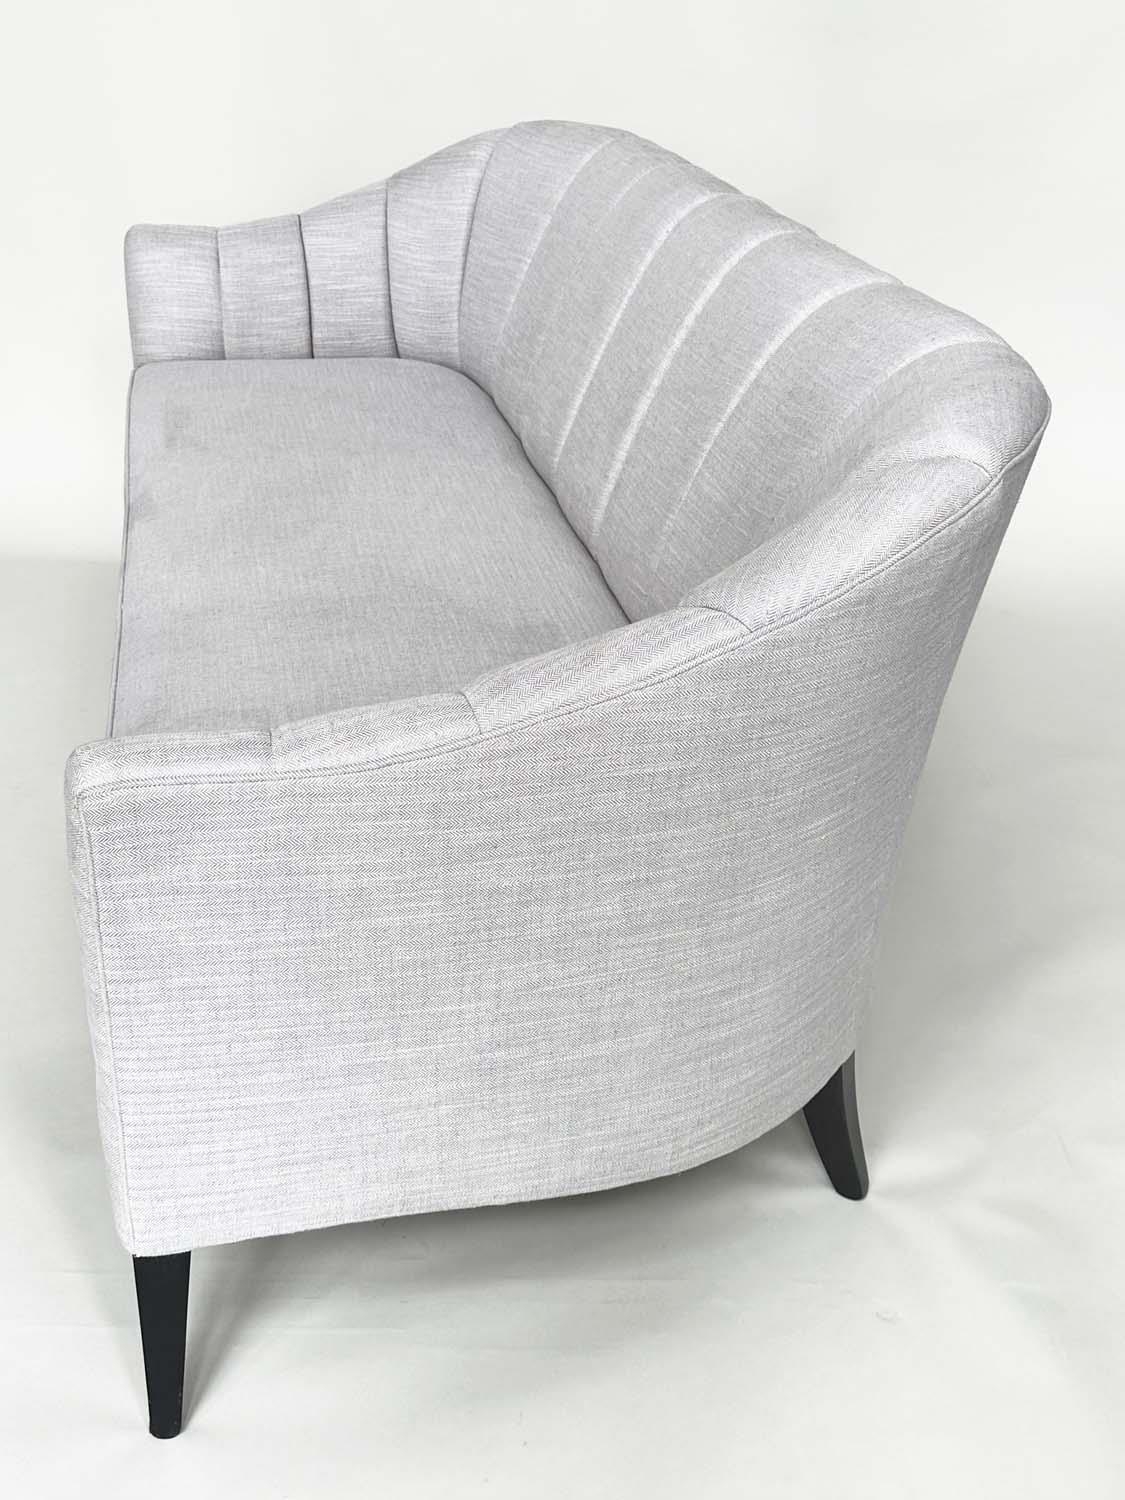 BRAY DESIGN SOFA, ribbed curved back and out swept supports, in Sahco Flint fabric upholstery, 210cm - Image 8 of 11